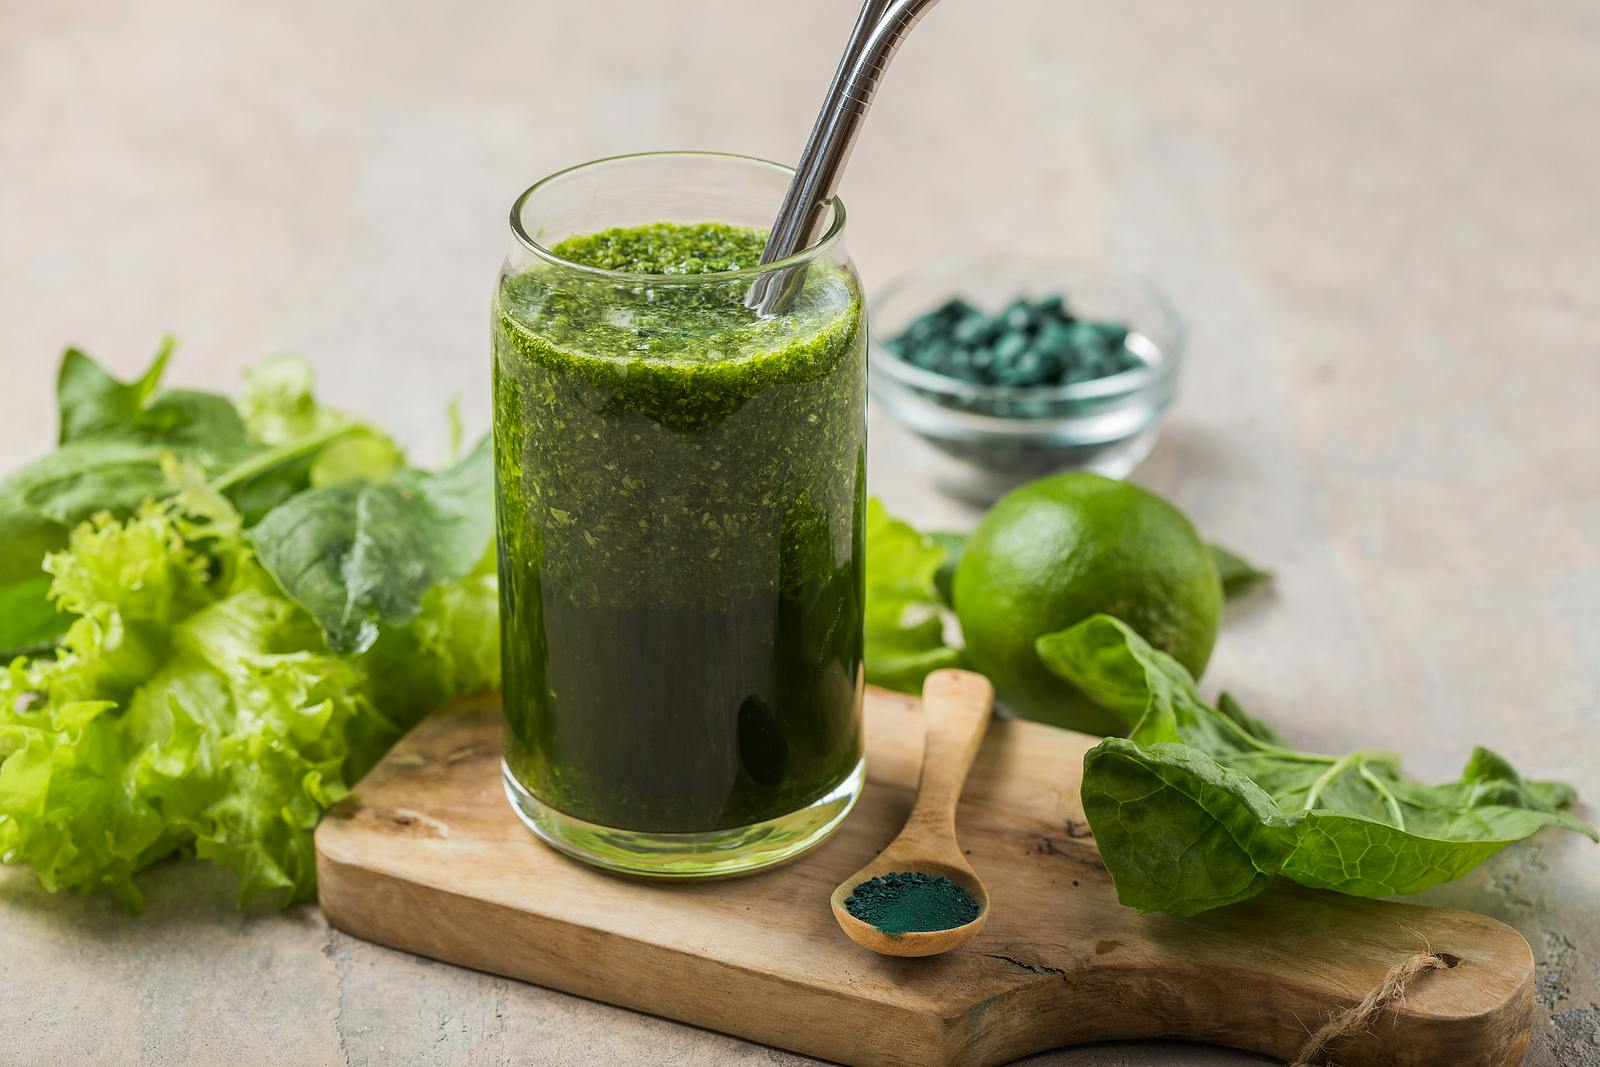 Green smoothie with spirulina. Young barley and chlorella spirulina. Detox superfood.Glass Jar of Healthy Green Smoothie Detox Drink wirh Green Apple Celery and Raw Spinach Diet Beverage Above Close Up
